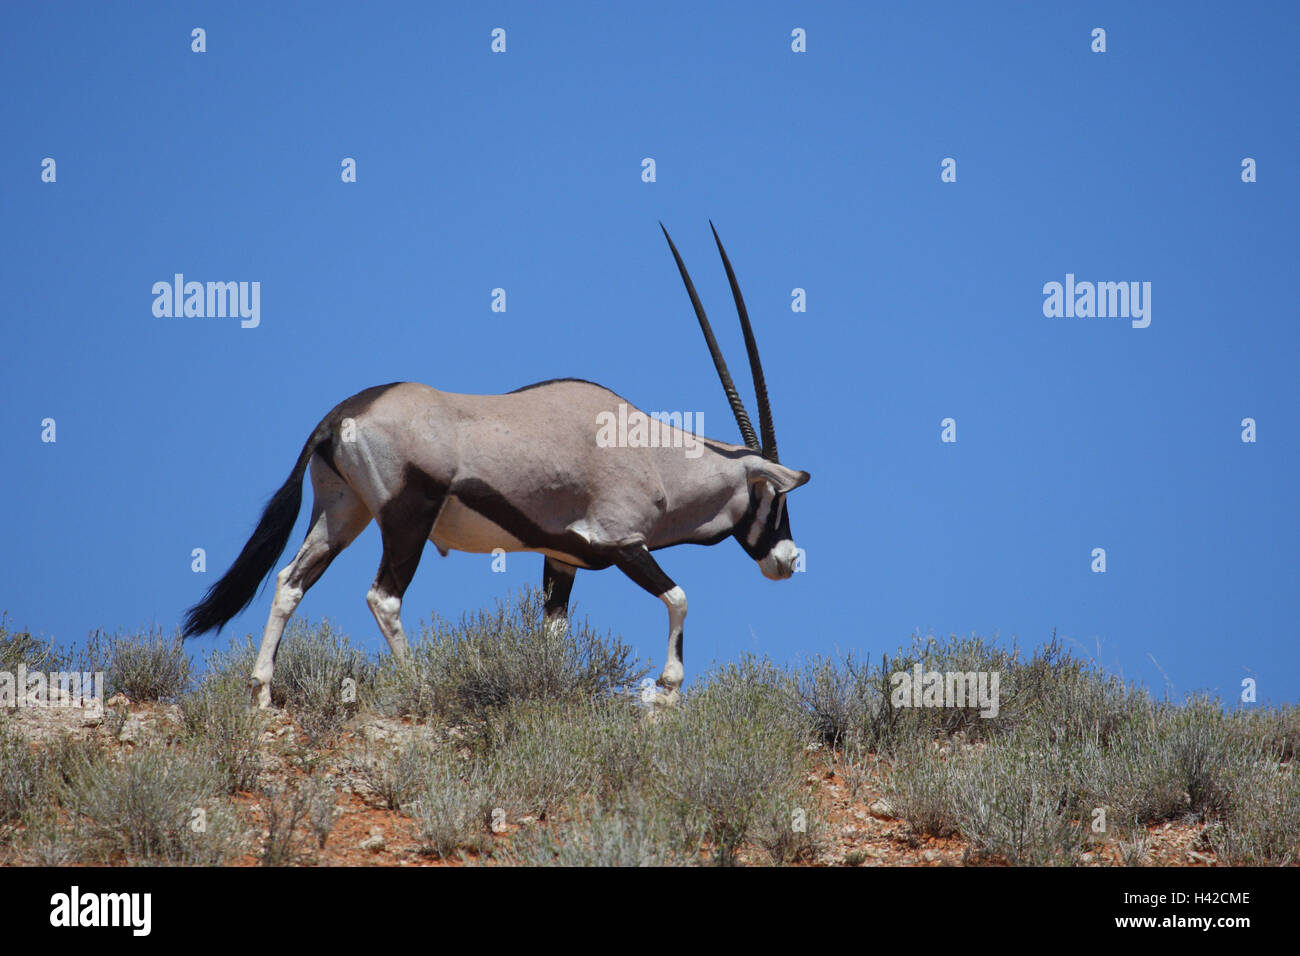 Spit vaulting horse, oryx, Foto Stock